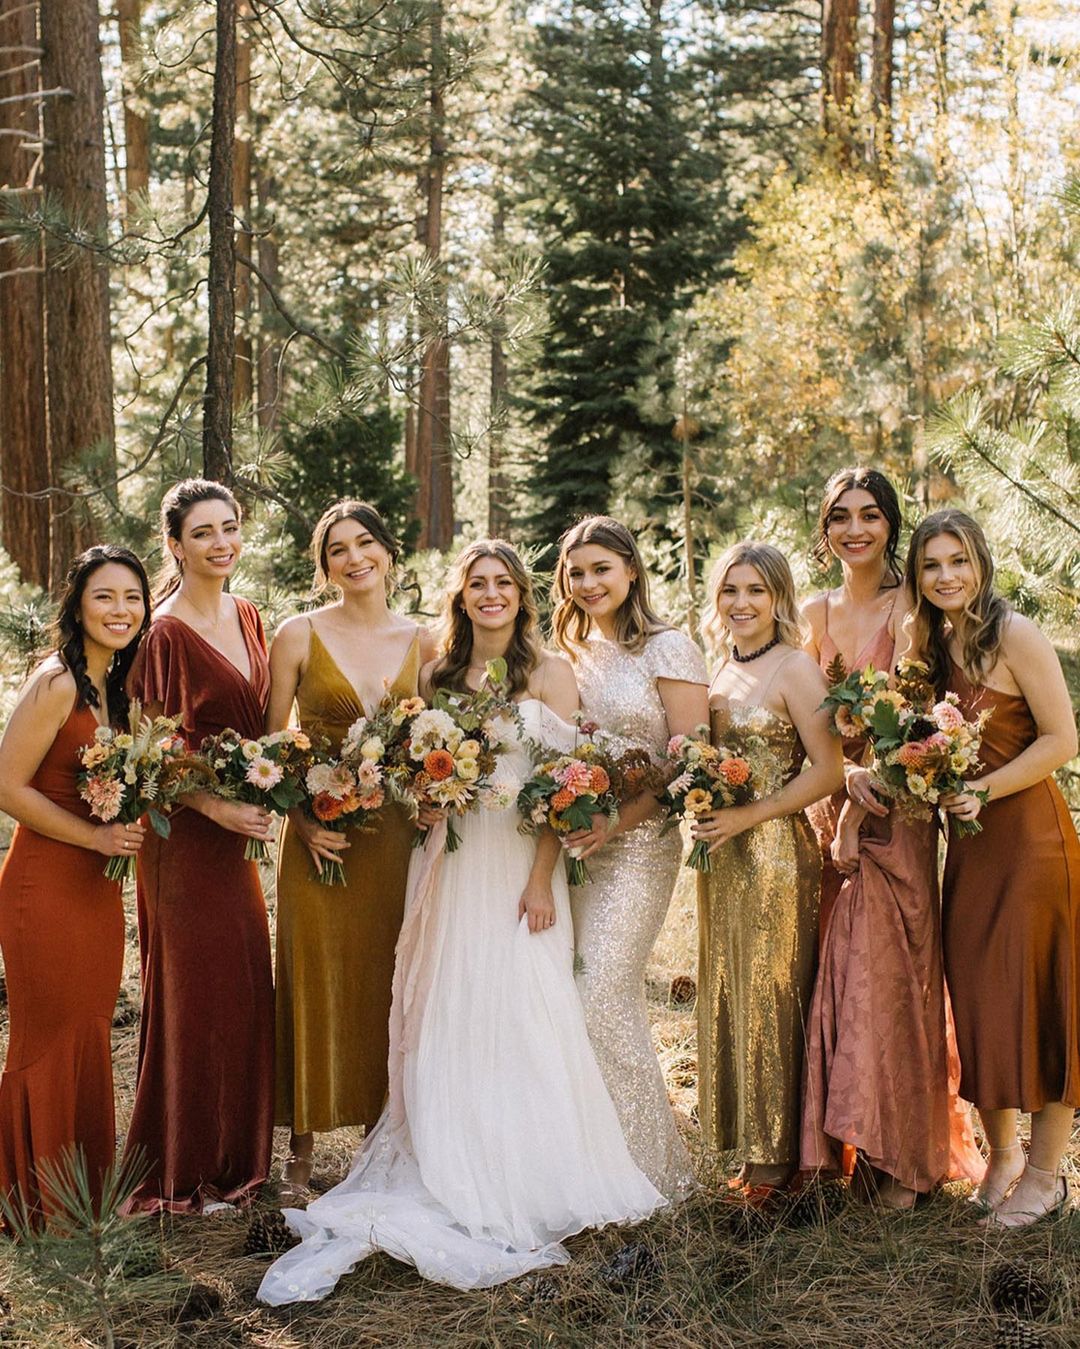 The bride and her bridal party in mix and matched bridesmaid dresses.